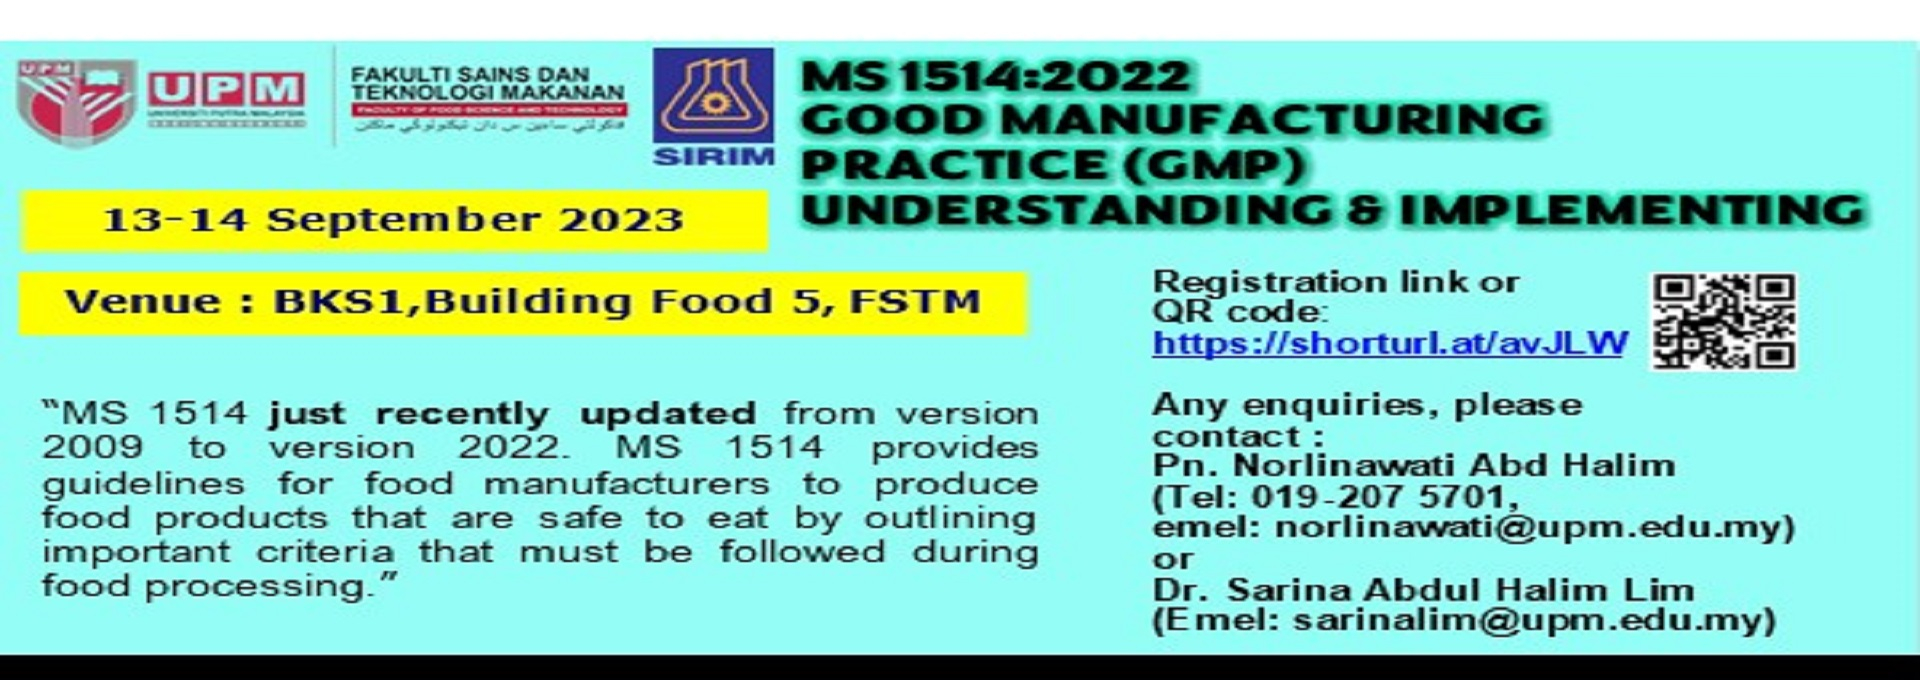 TRAINING ON MS 1514:2022 GOOD MANUFACTURING PRACTICE (GMP) UNDERSTANDING & IMPLEMENTING